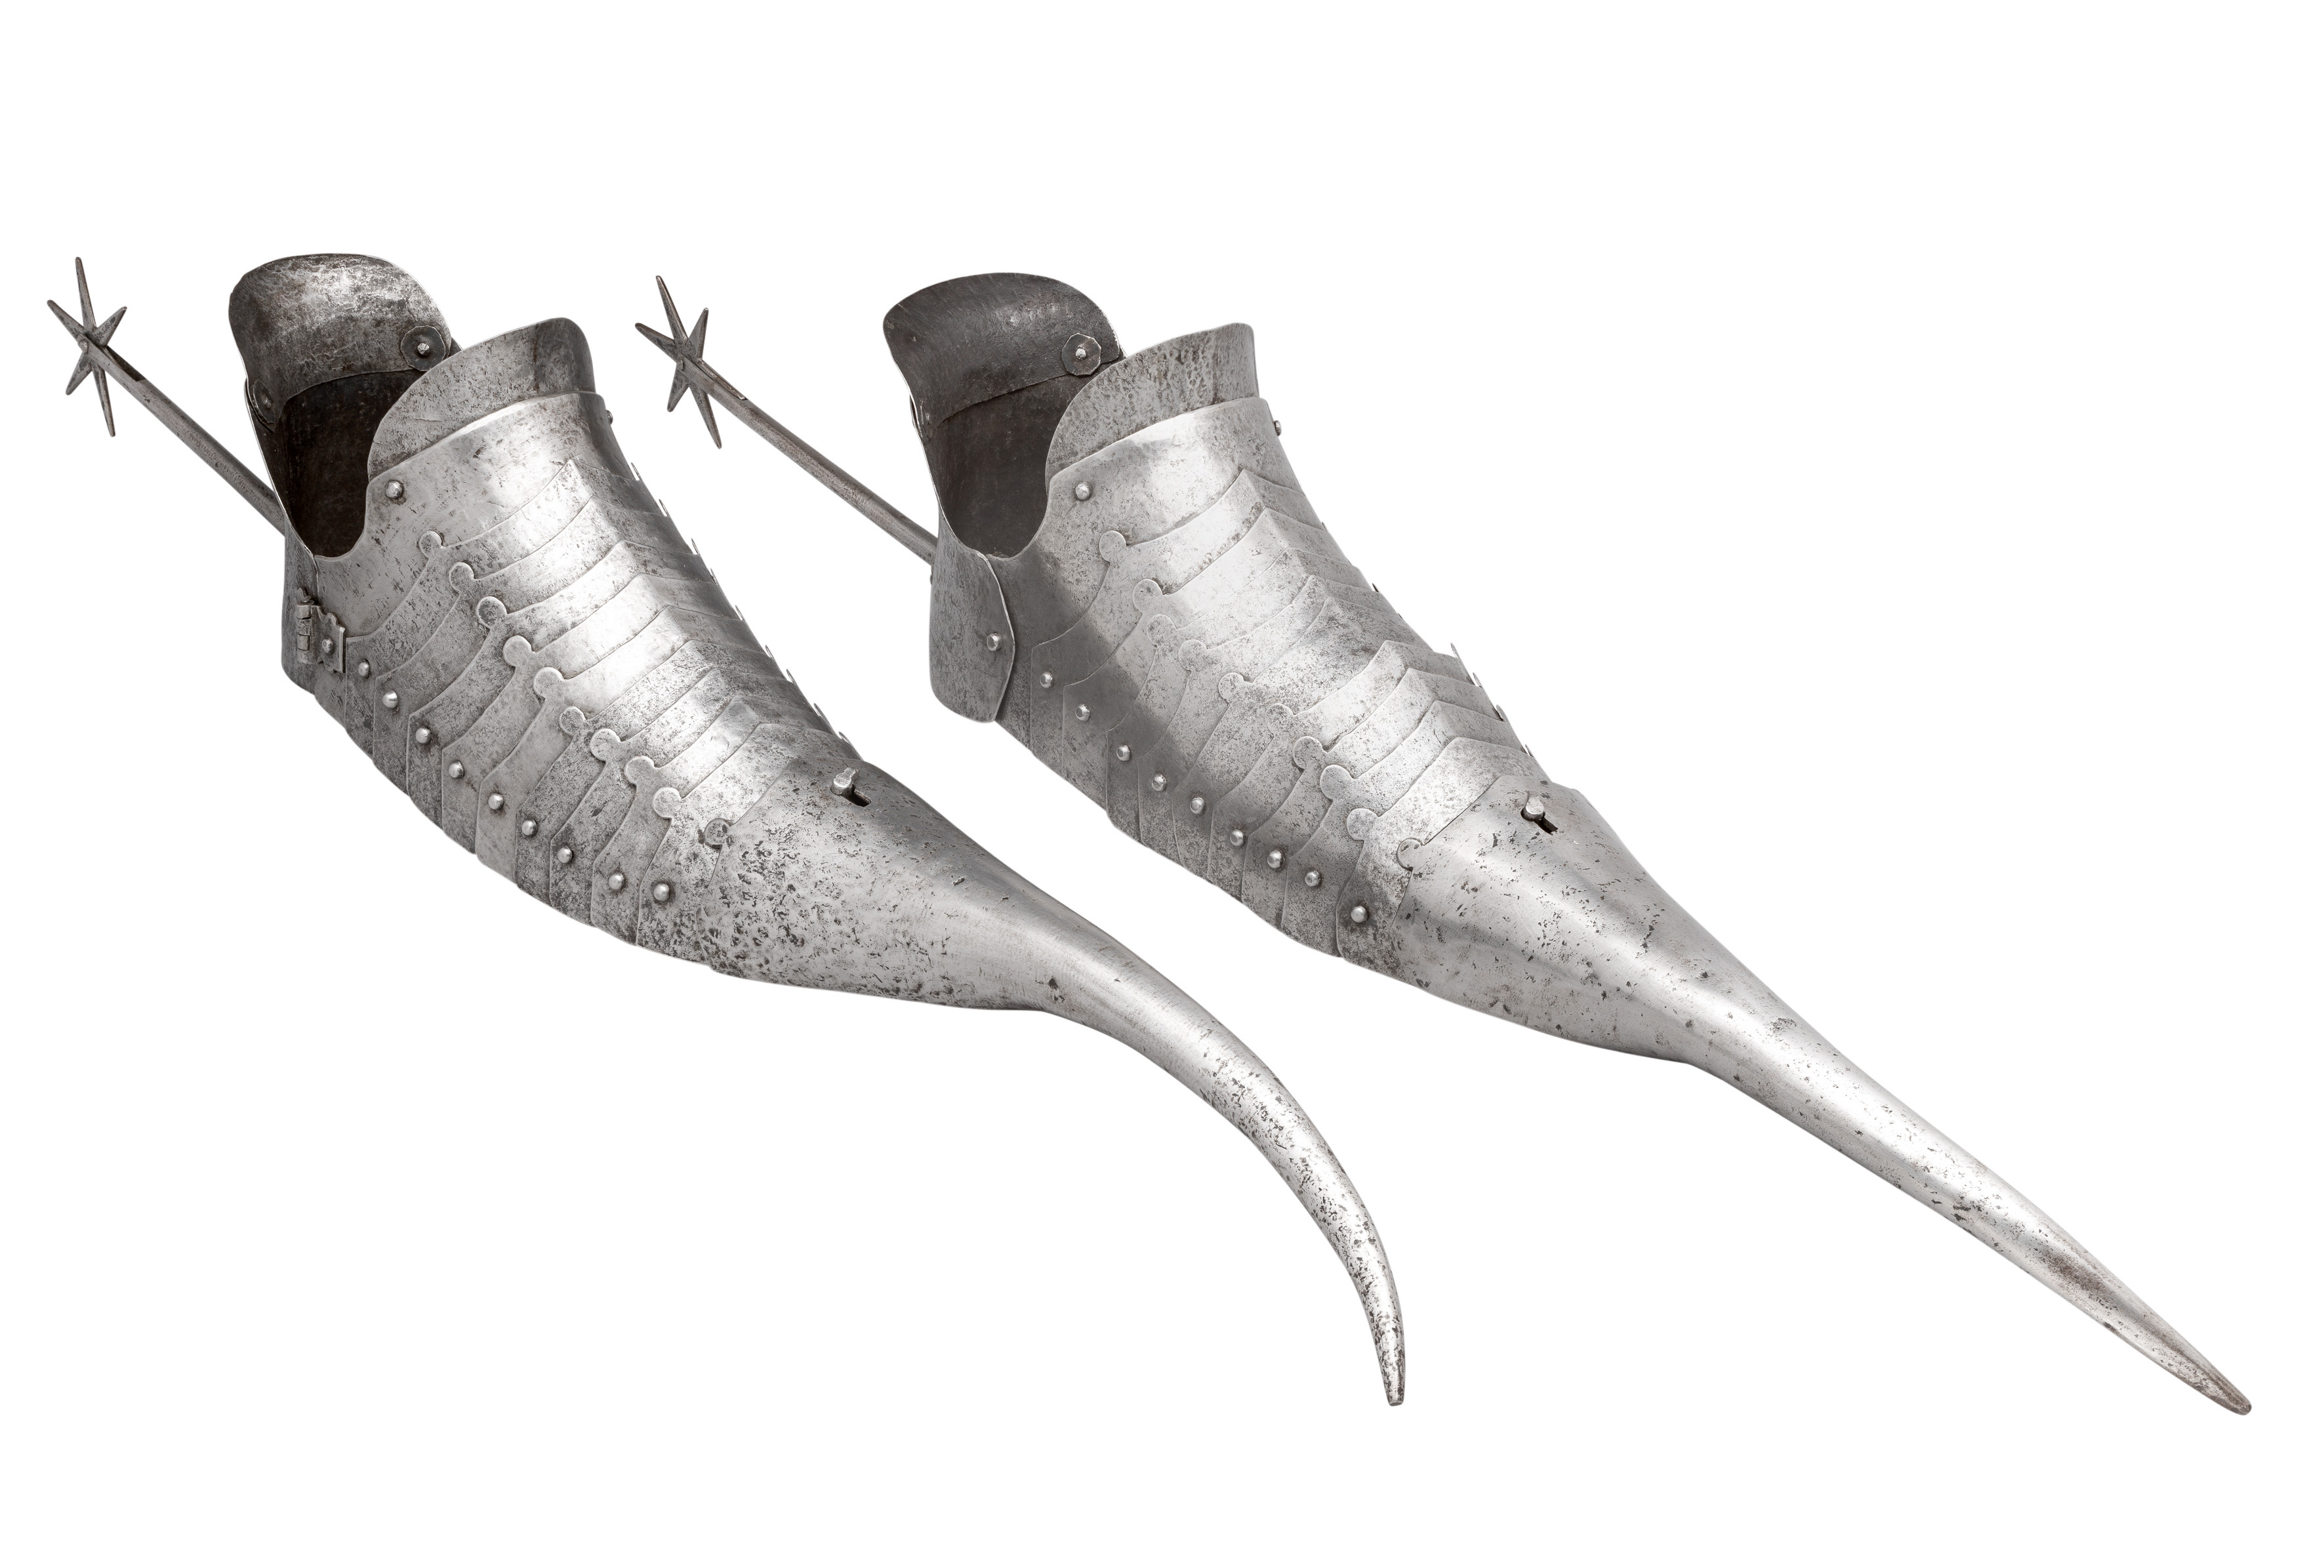 ‡ A PAIR OF SABATONS IN THE GERMAN "GOTHIC" STYLE OF THE LATE 15TH CENTURY^ LATE 19TH CENTURY